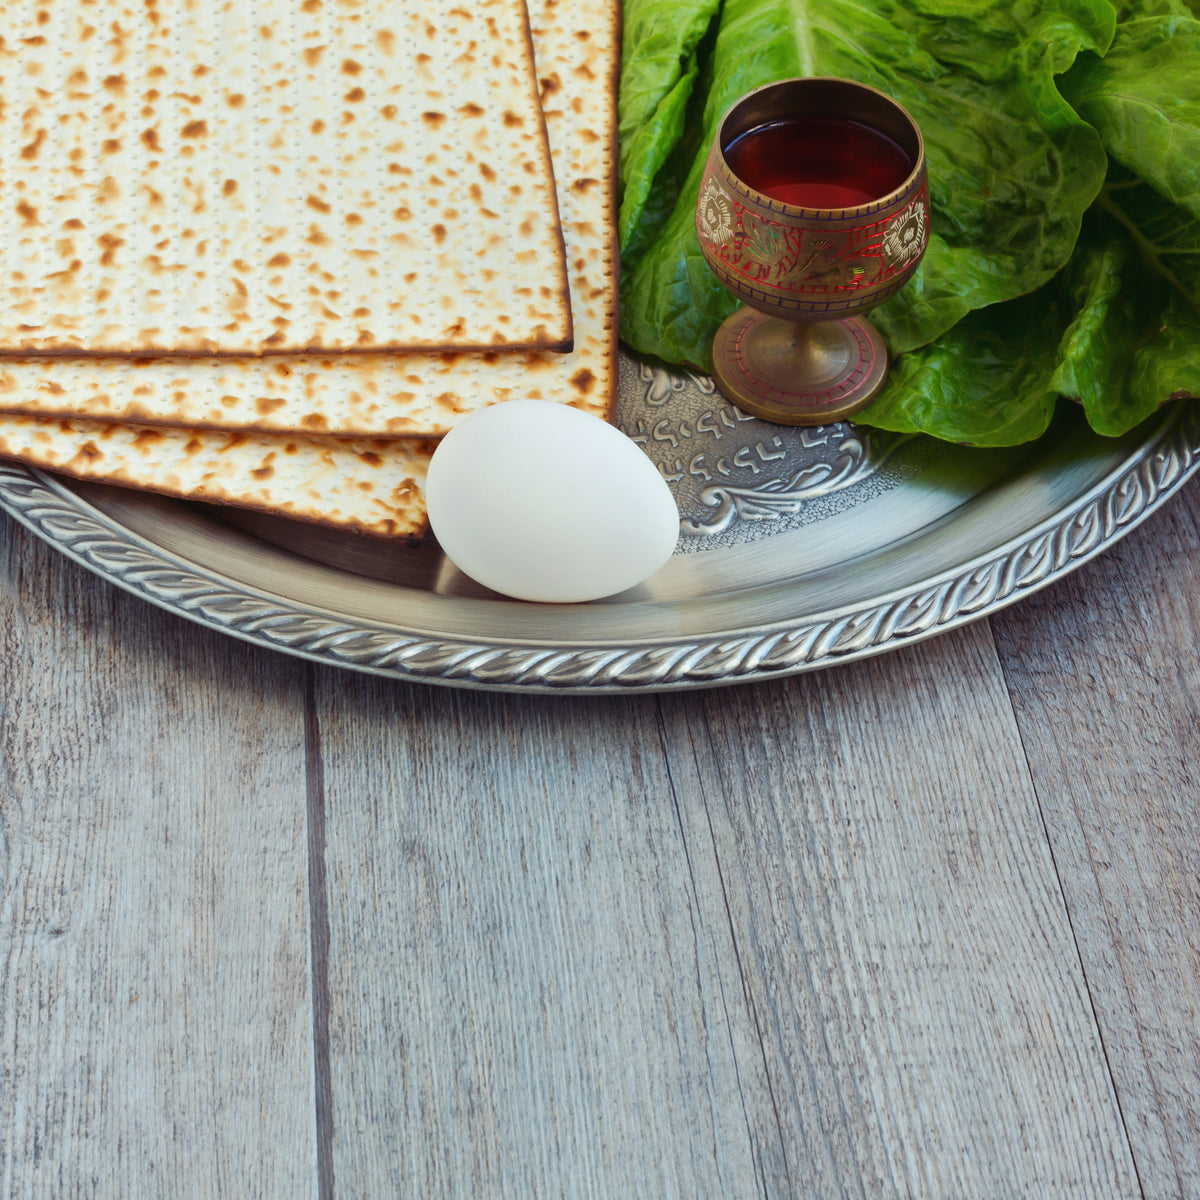 Celebrating Passover with Food Allergies